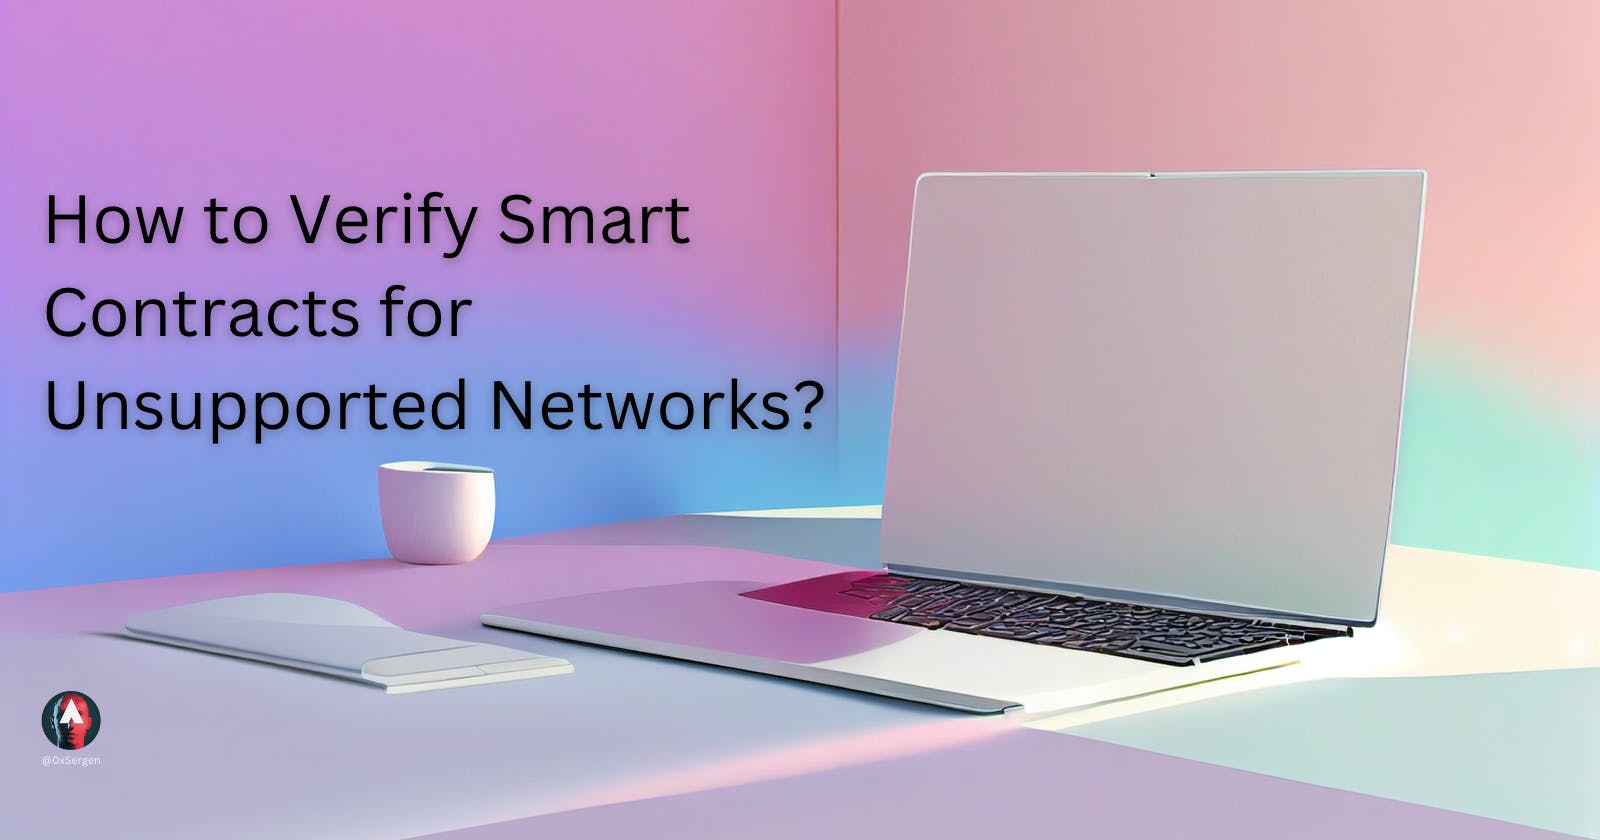 How to Verify Smart Contracts for Unsupported Networks?